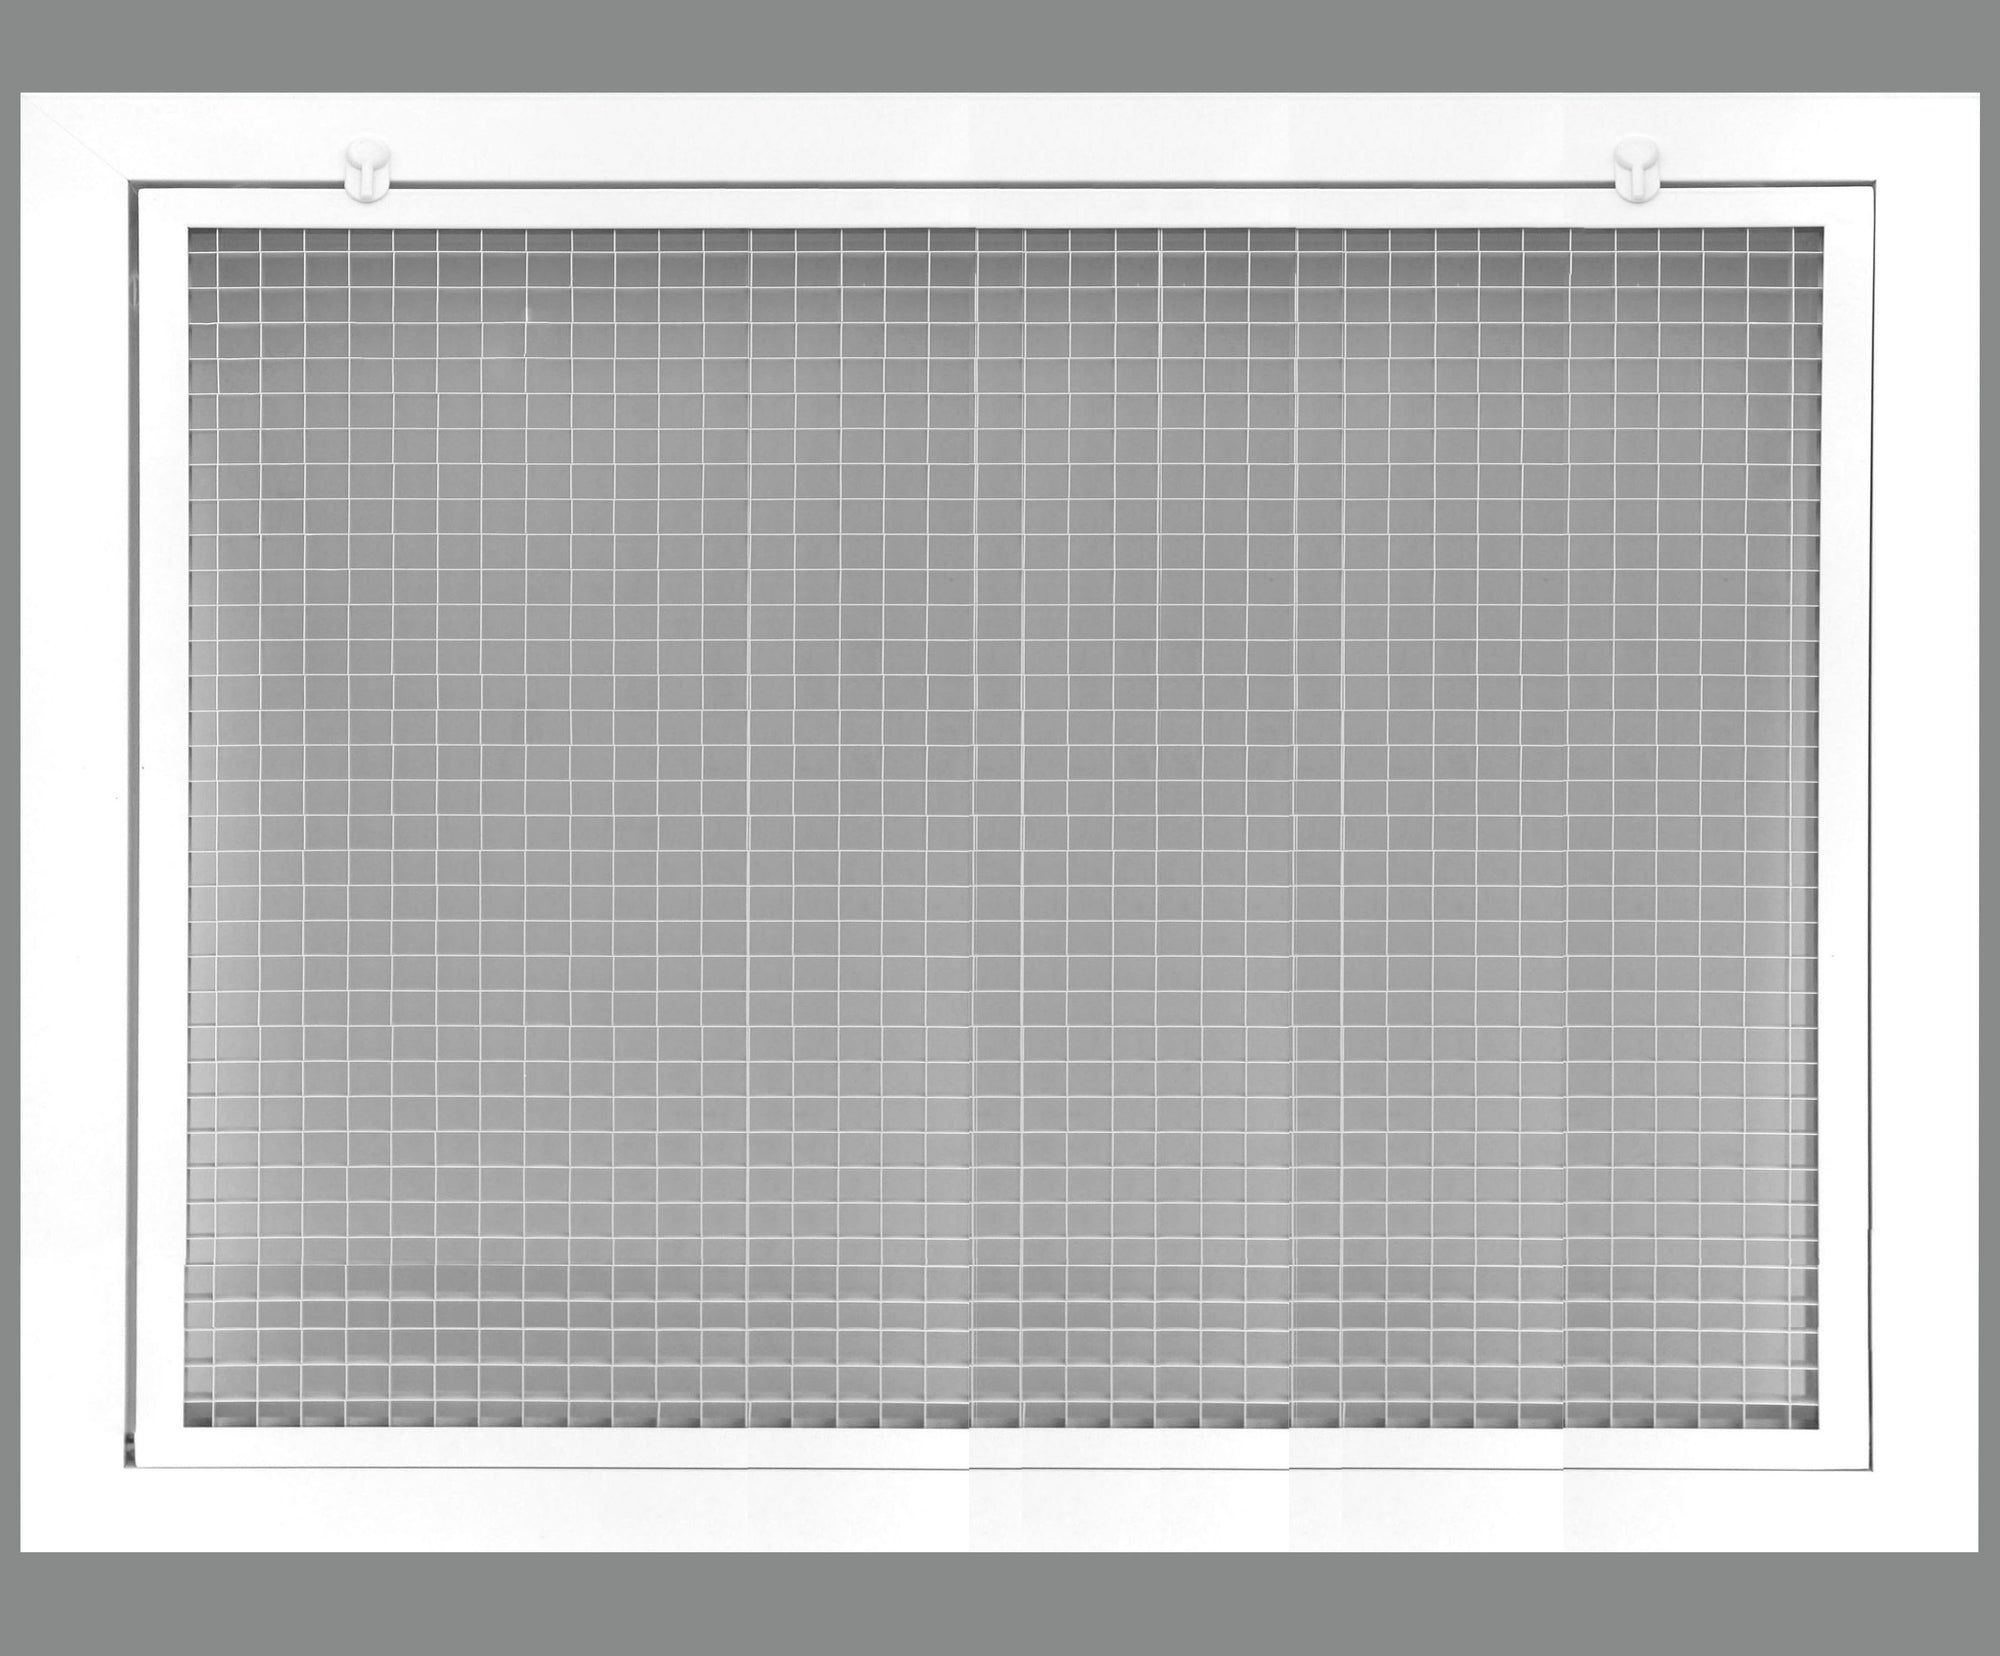 22" x 18" Cube Core Eggcrate Return Air Filter Grille for 1" Filter